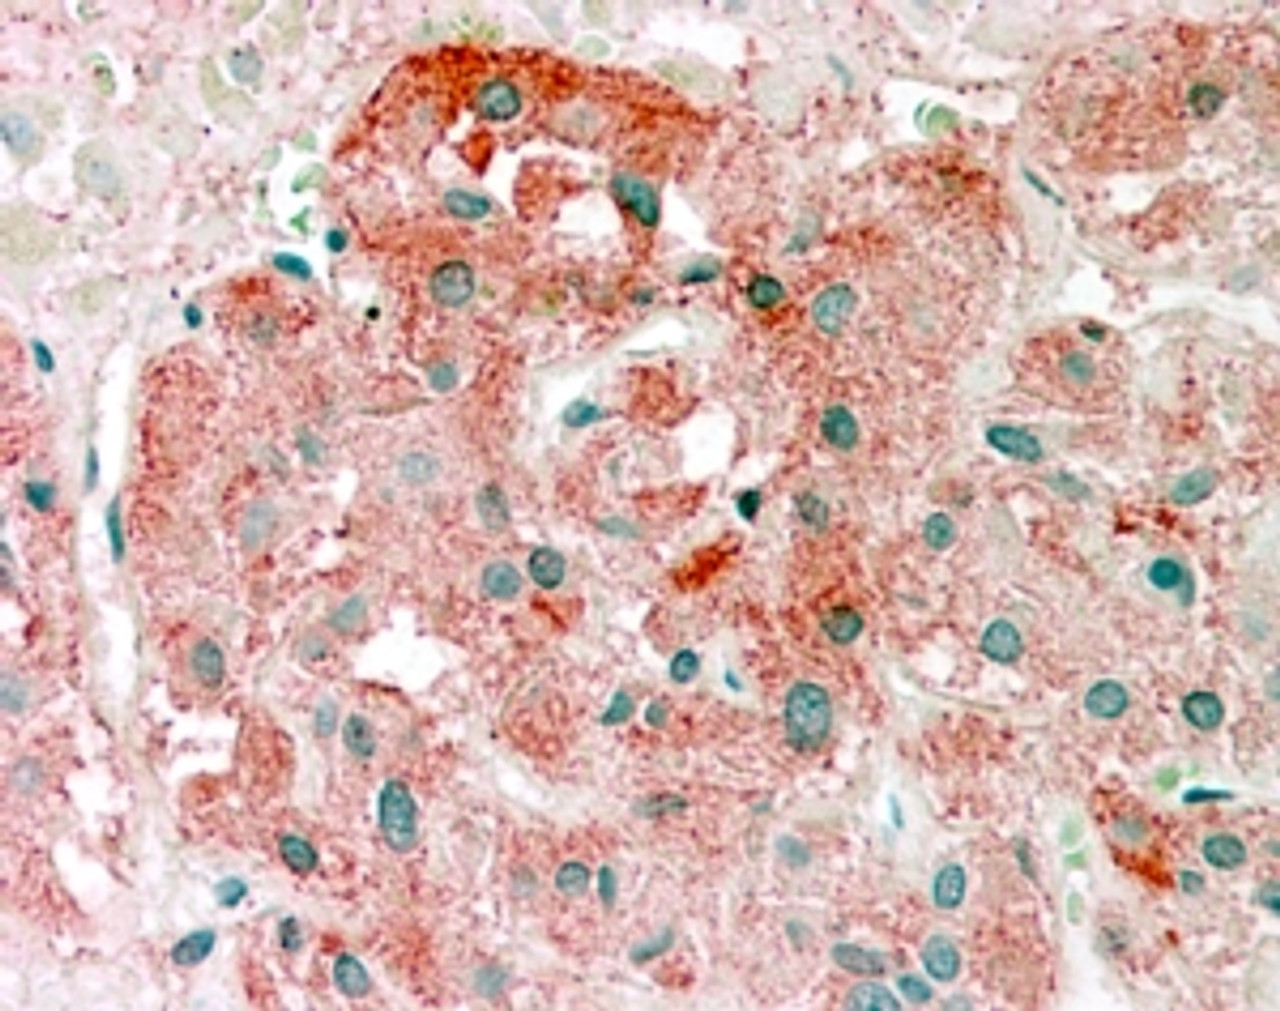 46-347 (2.5ug/ml) staining of paraffin embedded Human Adrenal Gland. Steamed antigen retrieval with citrate buffer pH 6, AP-staining.